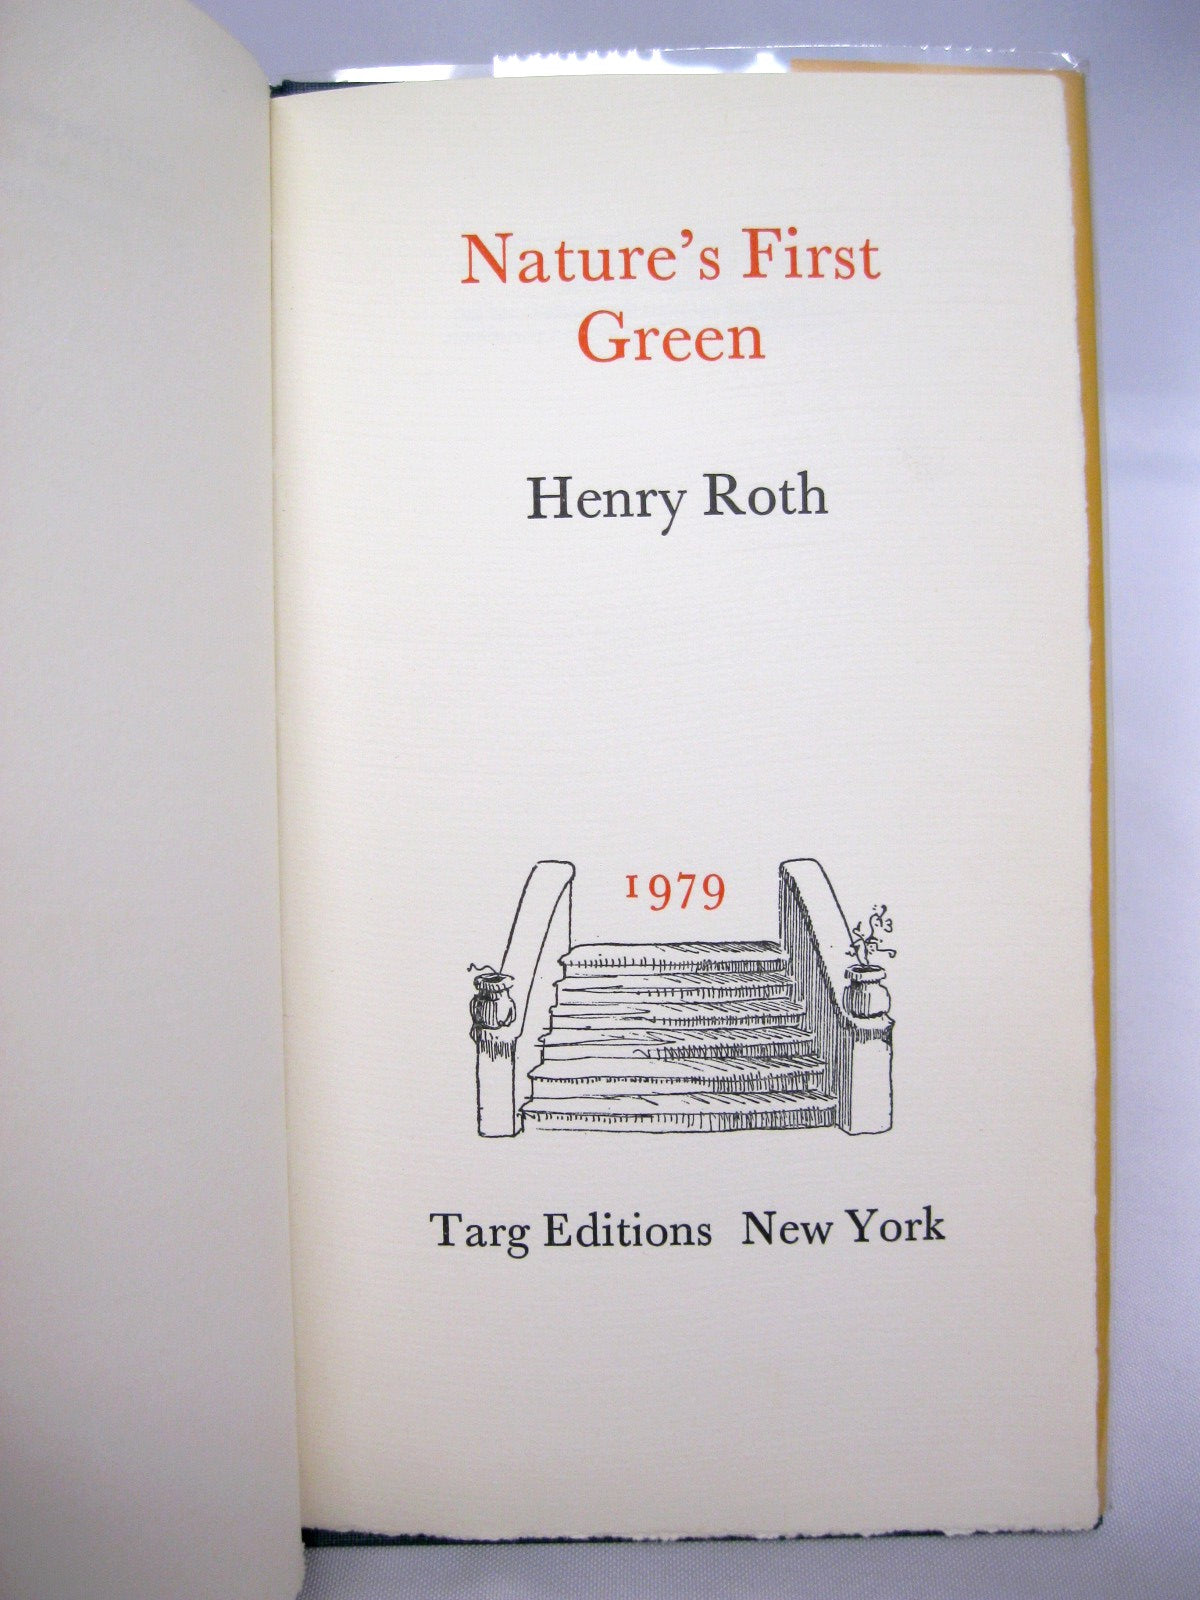 Nature's First Green by Henry Roth